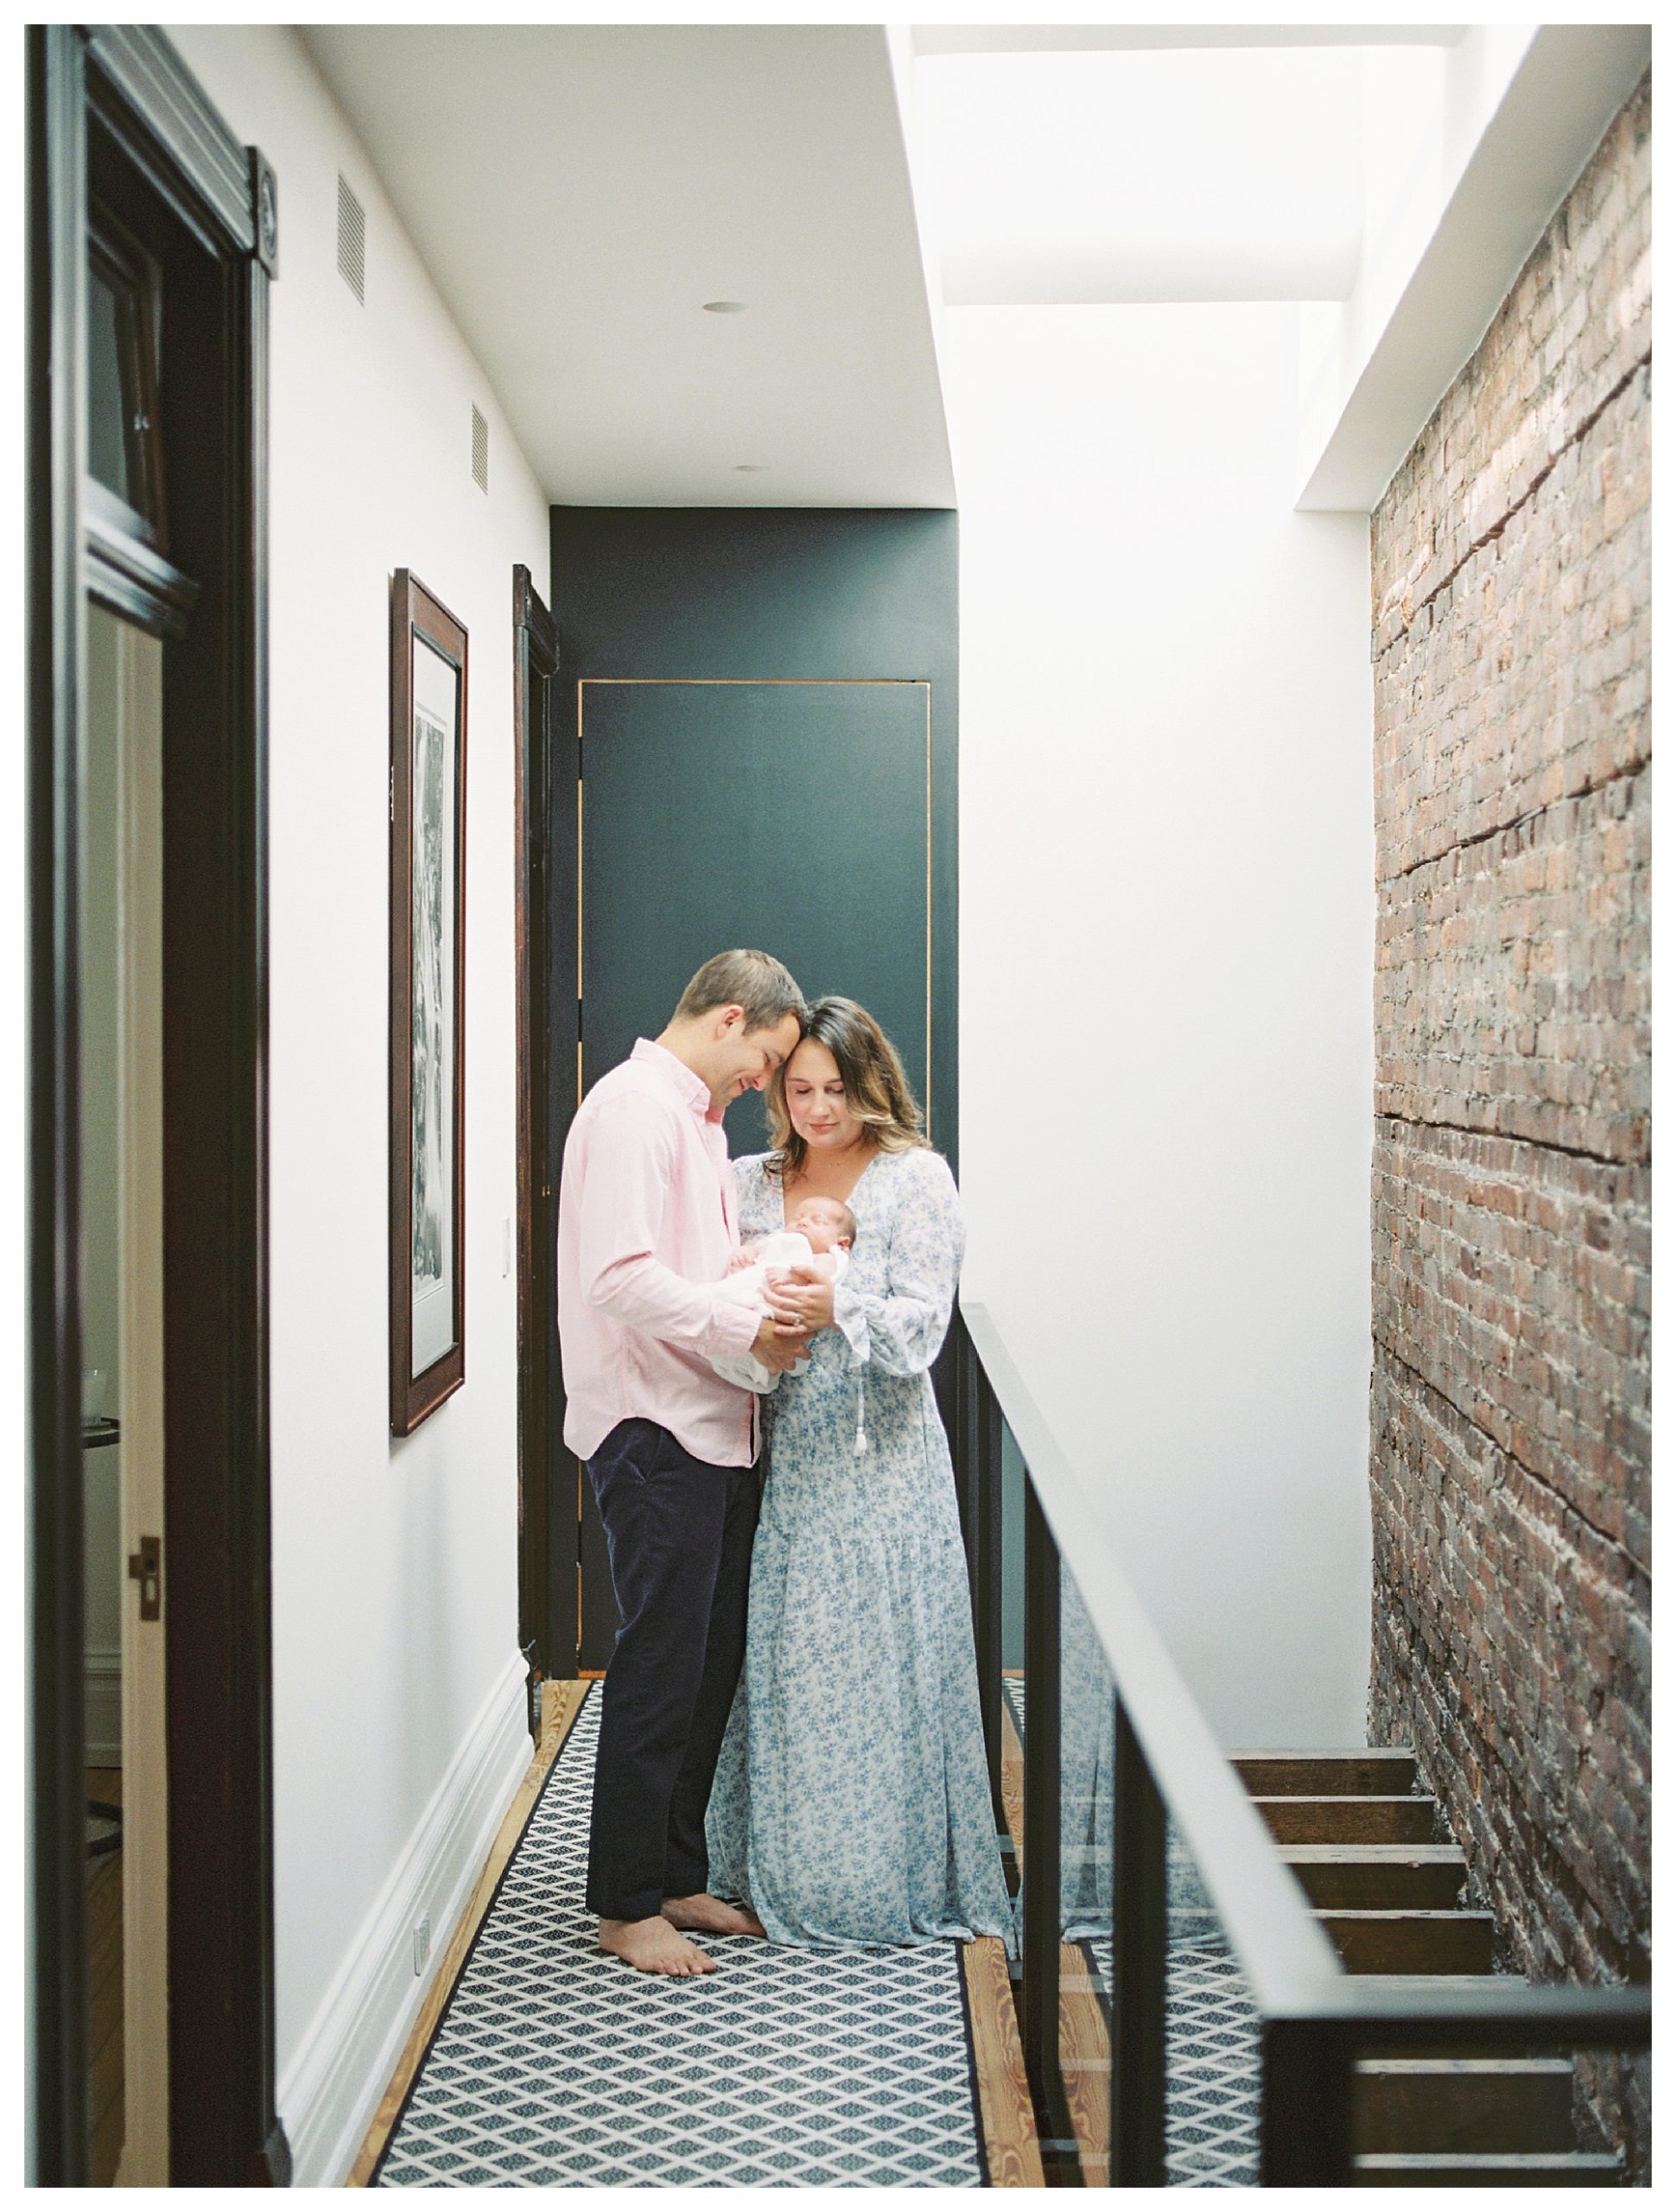 New parents stand in their hallway, leaning into one another holding their newborn baby during their in-home newborn session.